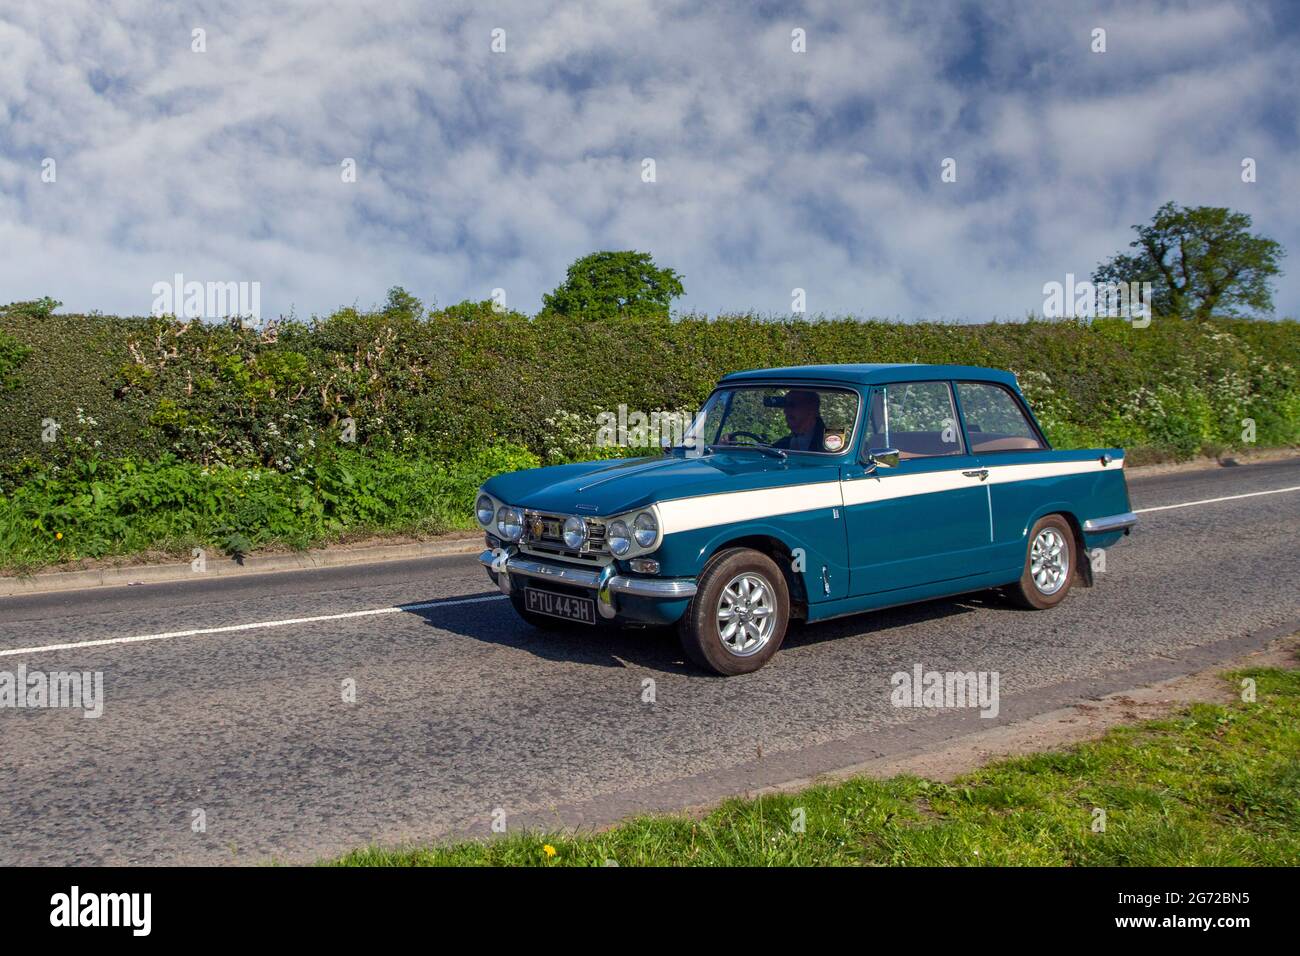 1970 70s blue Triumph Vitesse compact six-cylinder car built by Standard-Triumph 1996cc petrol 2dr en-route to Capesthorne Hall classic May car show, Cheshire, UK Stock Photo